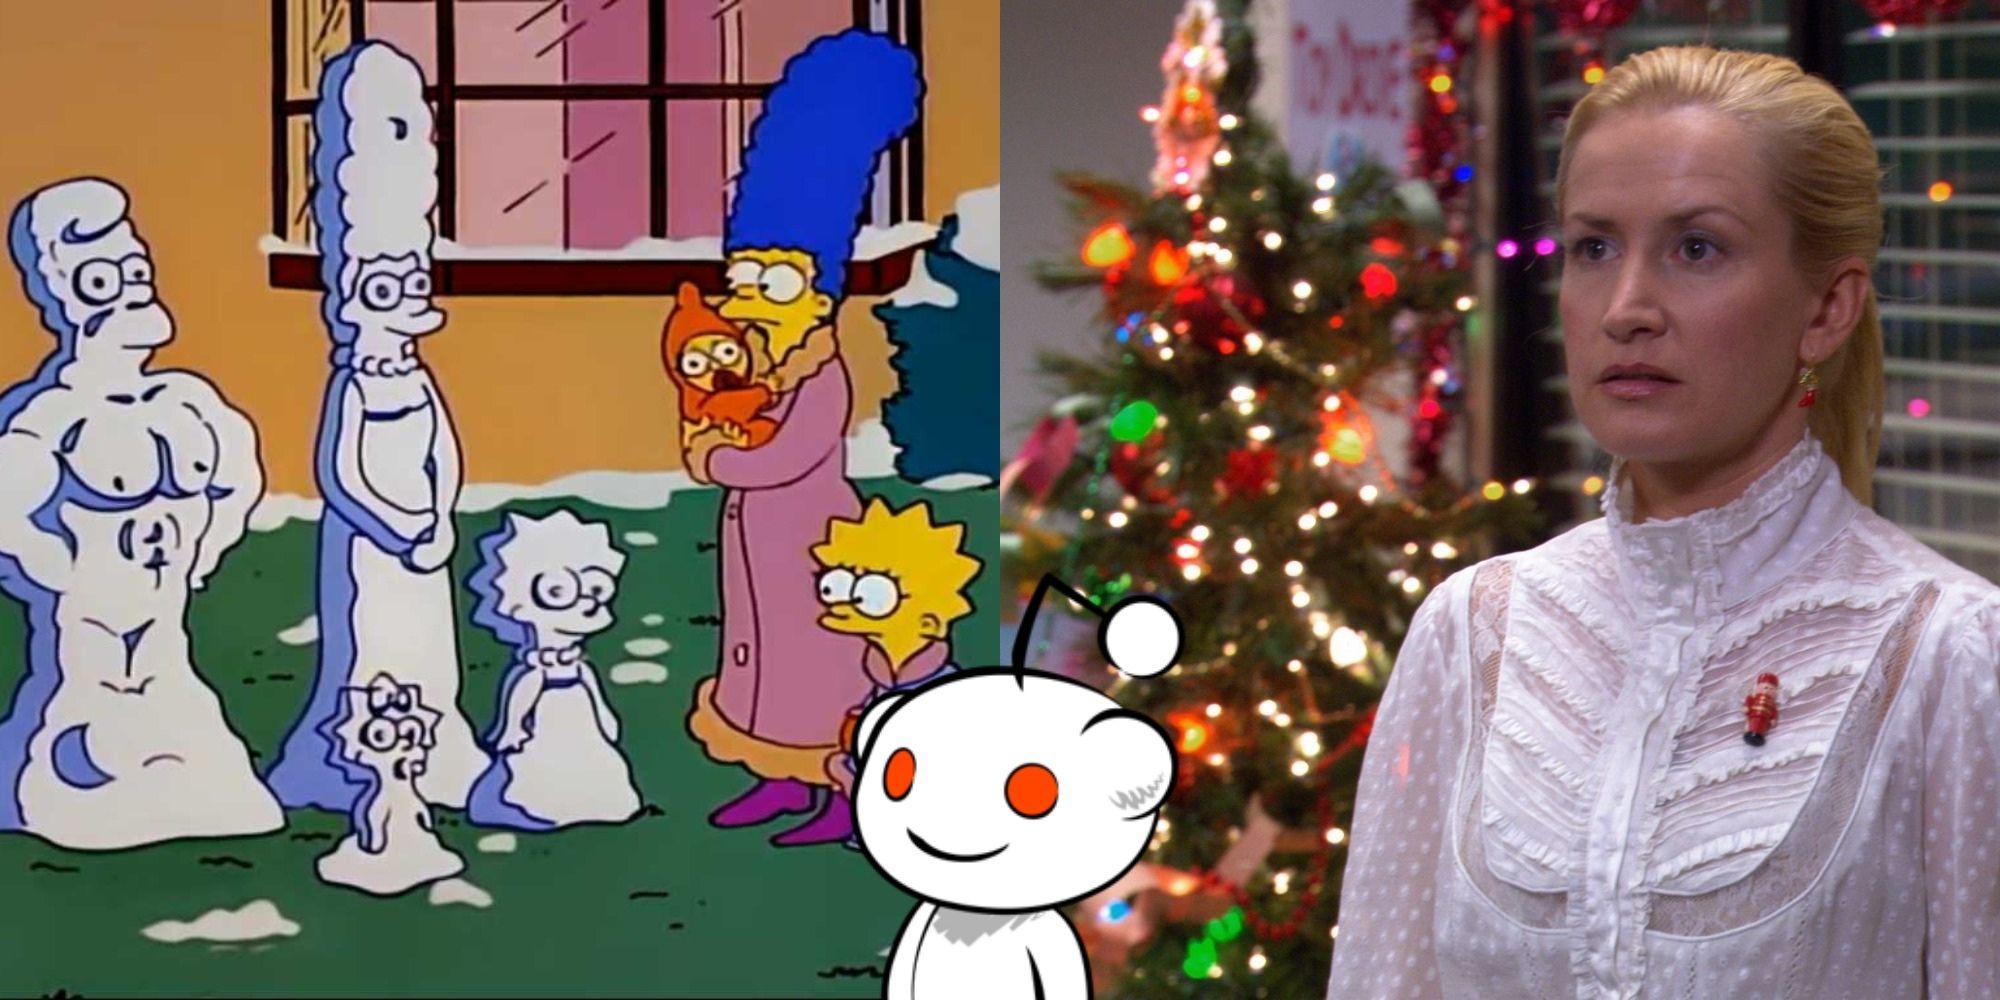 10 Best TV Holiday Specials (According To Reddit)